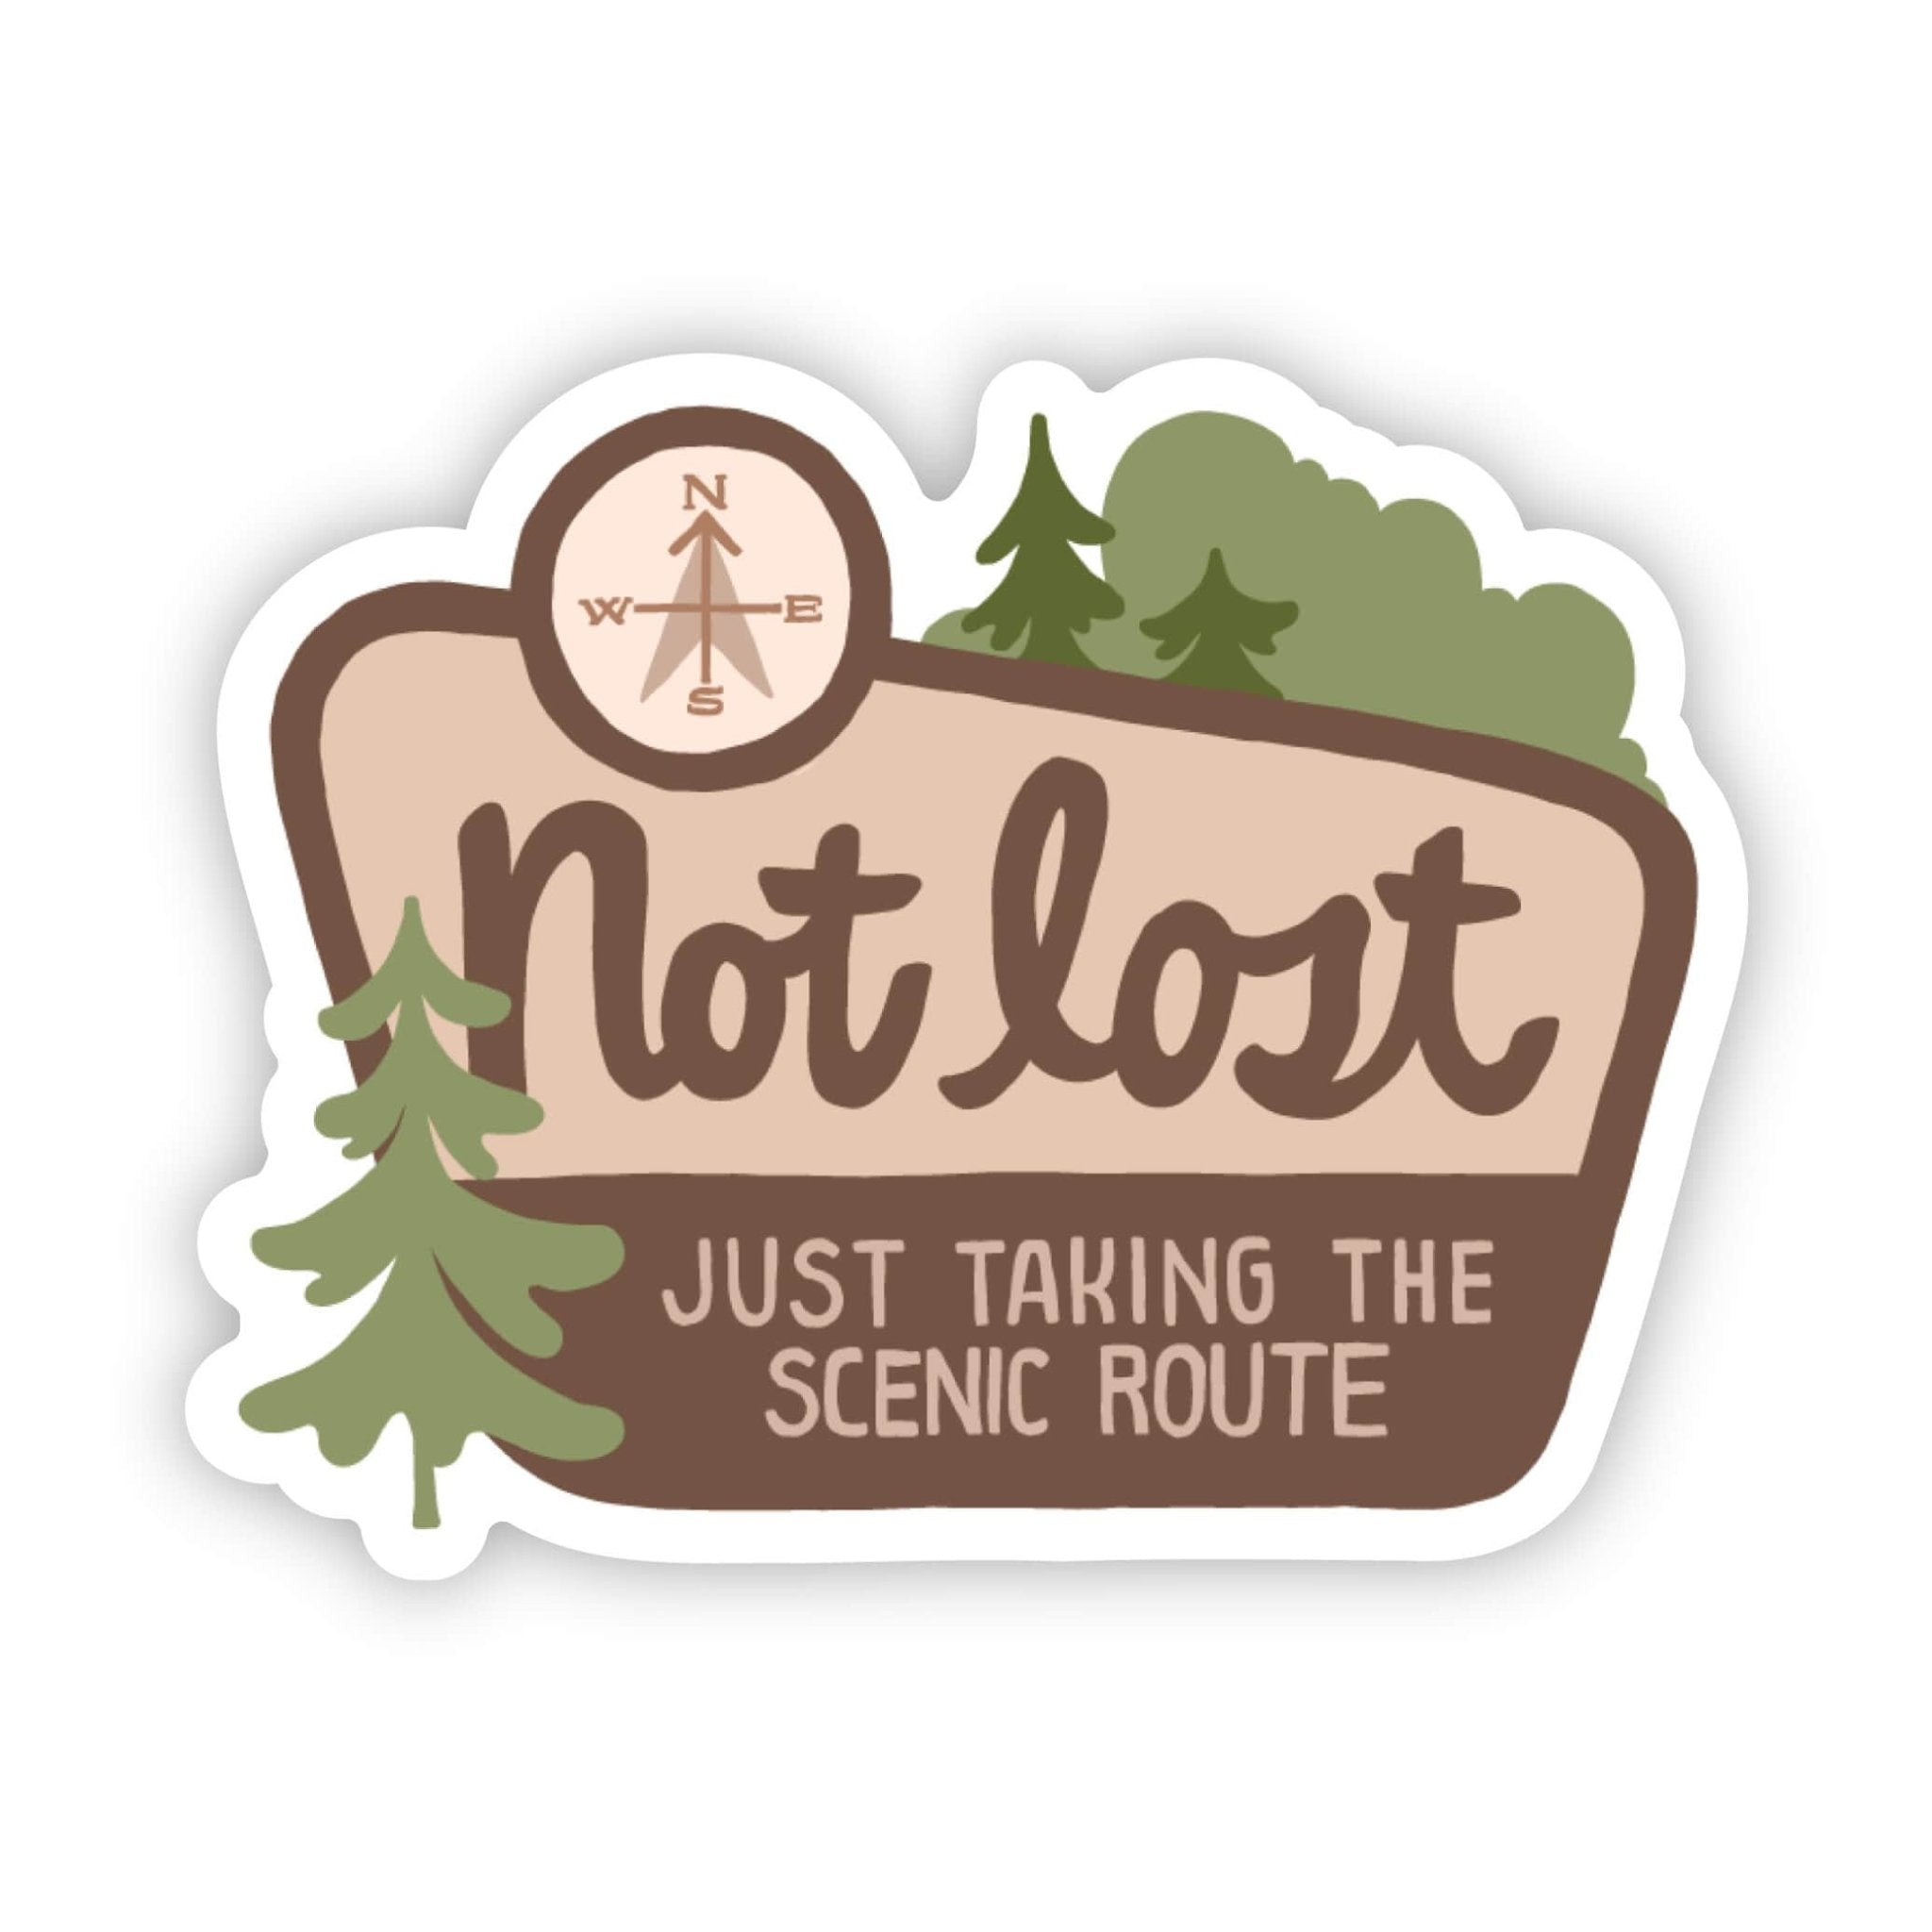 "Not Lost, Just Taking The Scenic Route" Sticker - Sacred Crystals Stickers